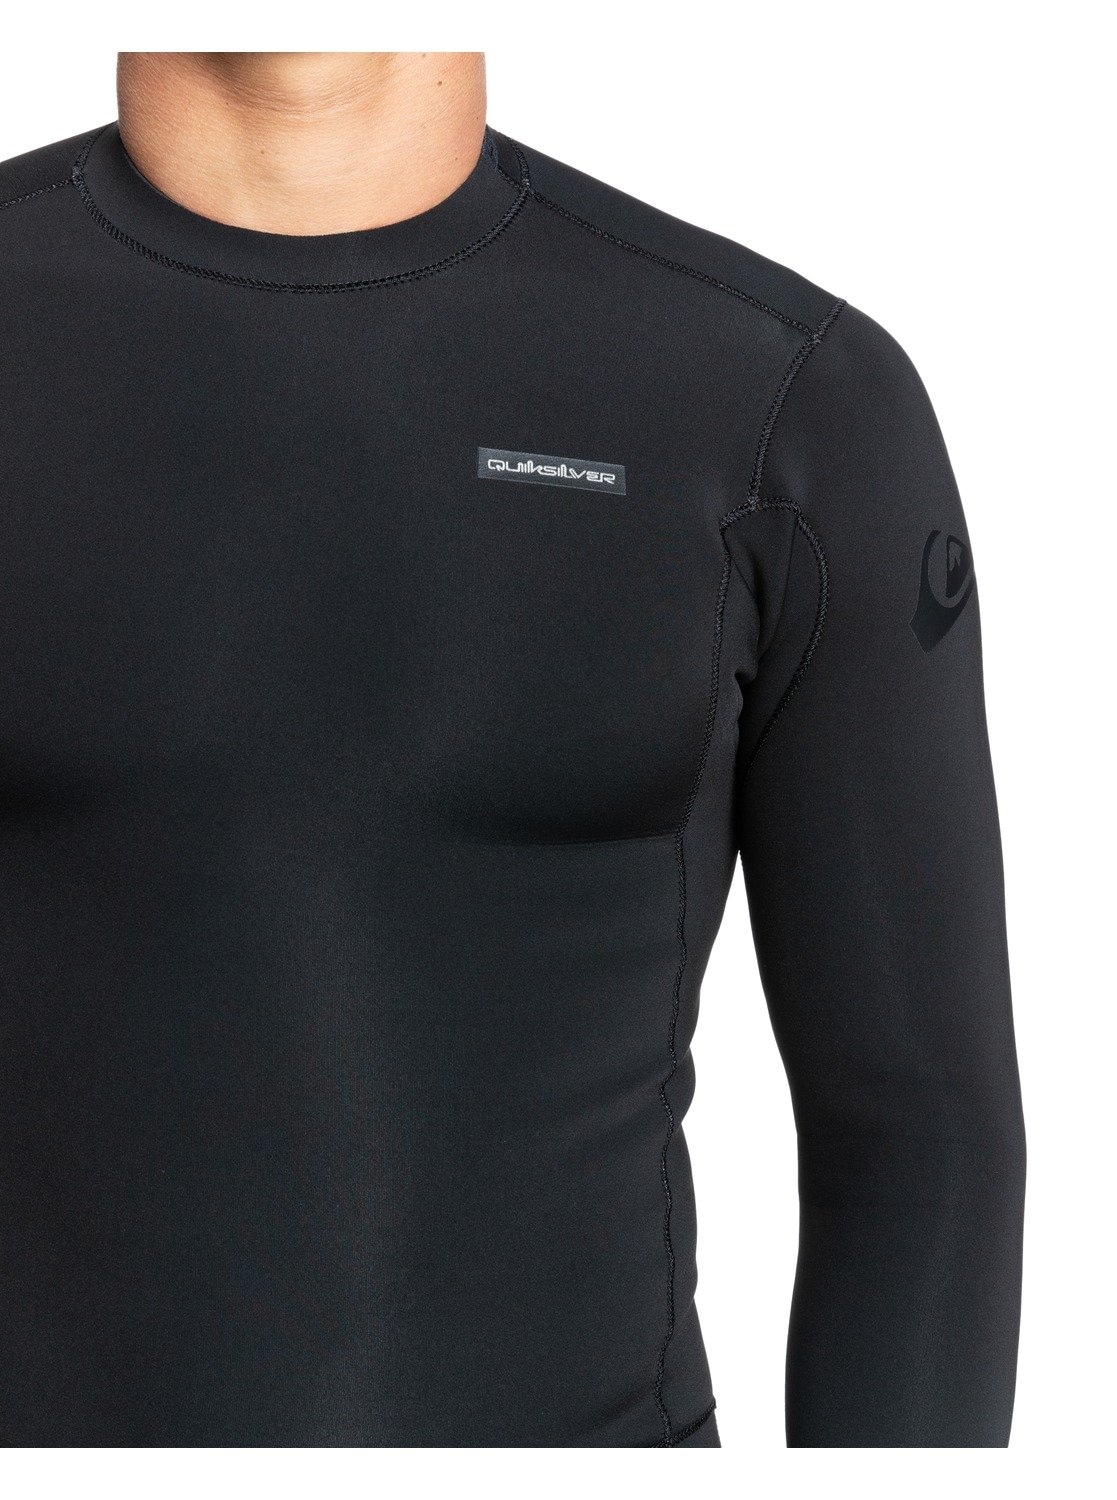 Quiksilver Neoprenanzug »2mm Sessions« Everyday bei ♕